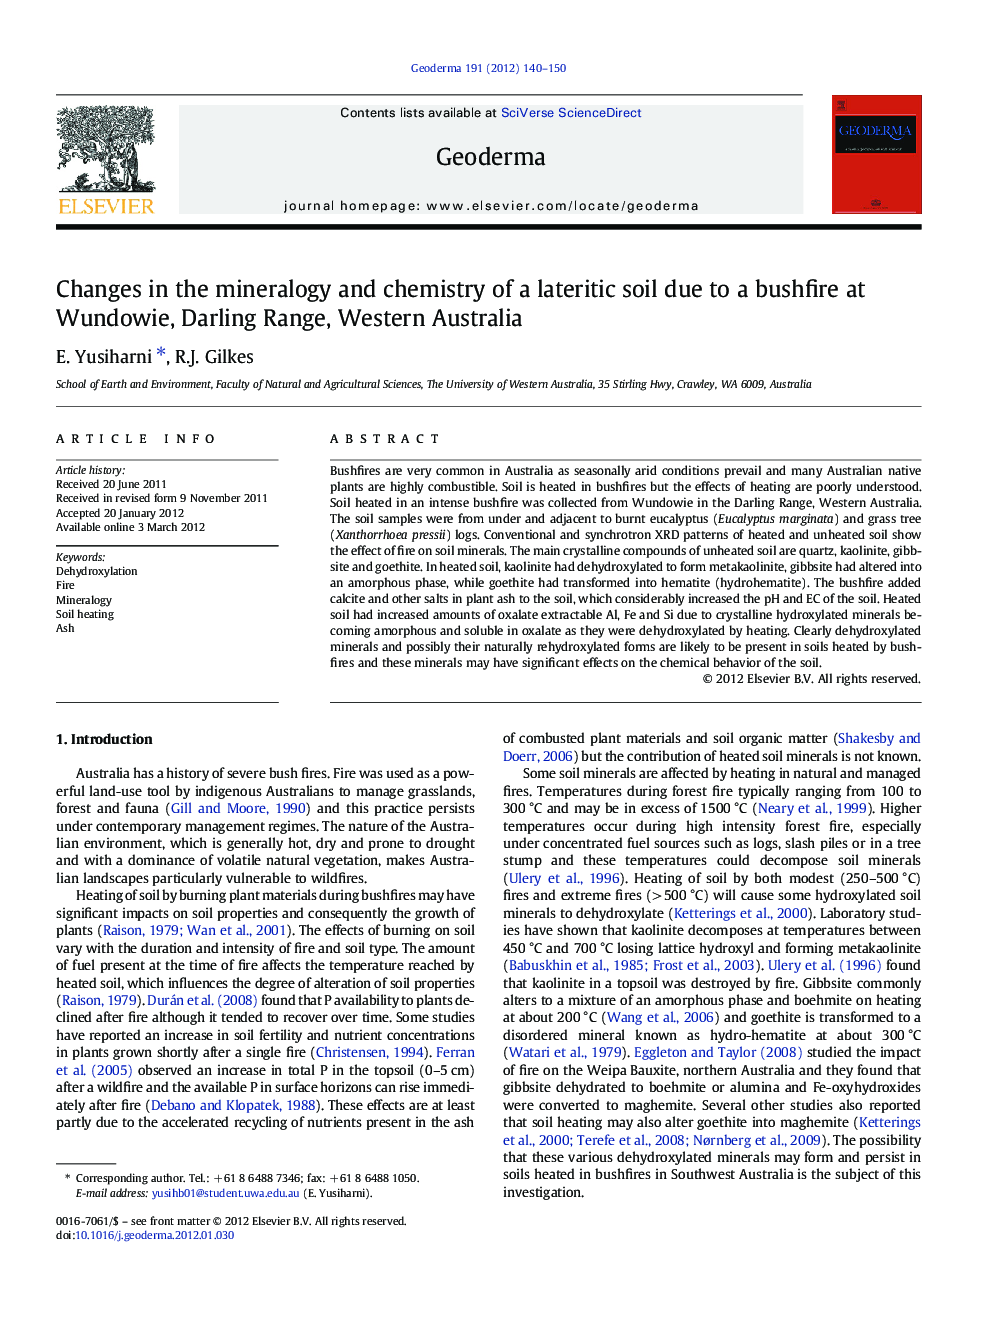 Changes in the mineralogy and chemistry of a lateritic soil due to a bushfire at Wundowie, Darling Range, Western Australia